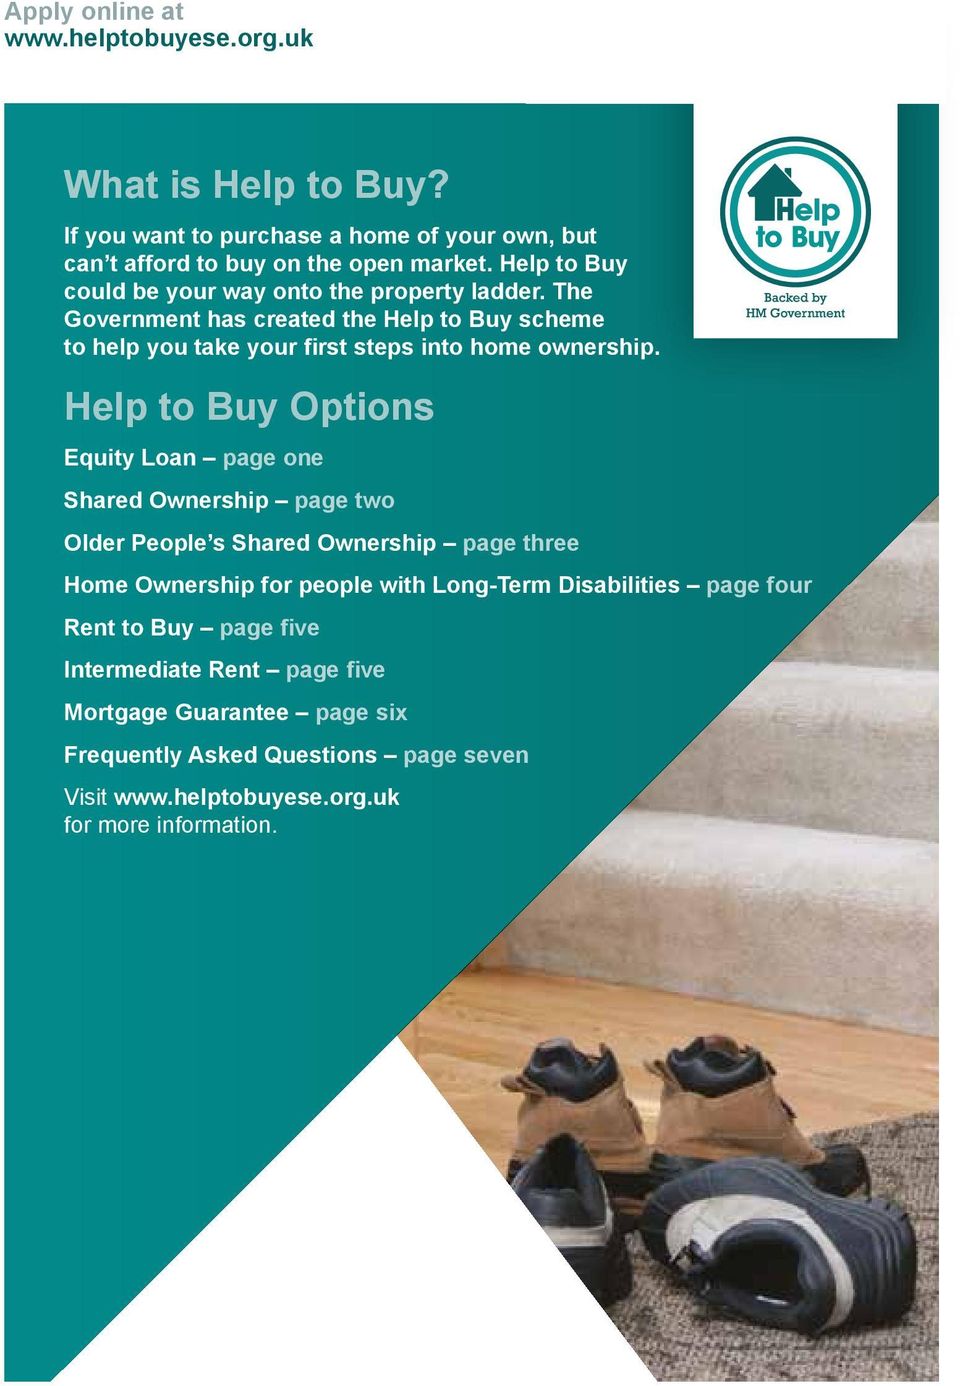 The Government has created the Help to Buy scheme to help you take your first steps into home ownership.